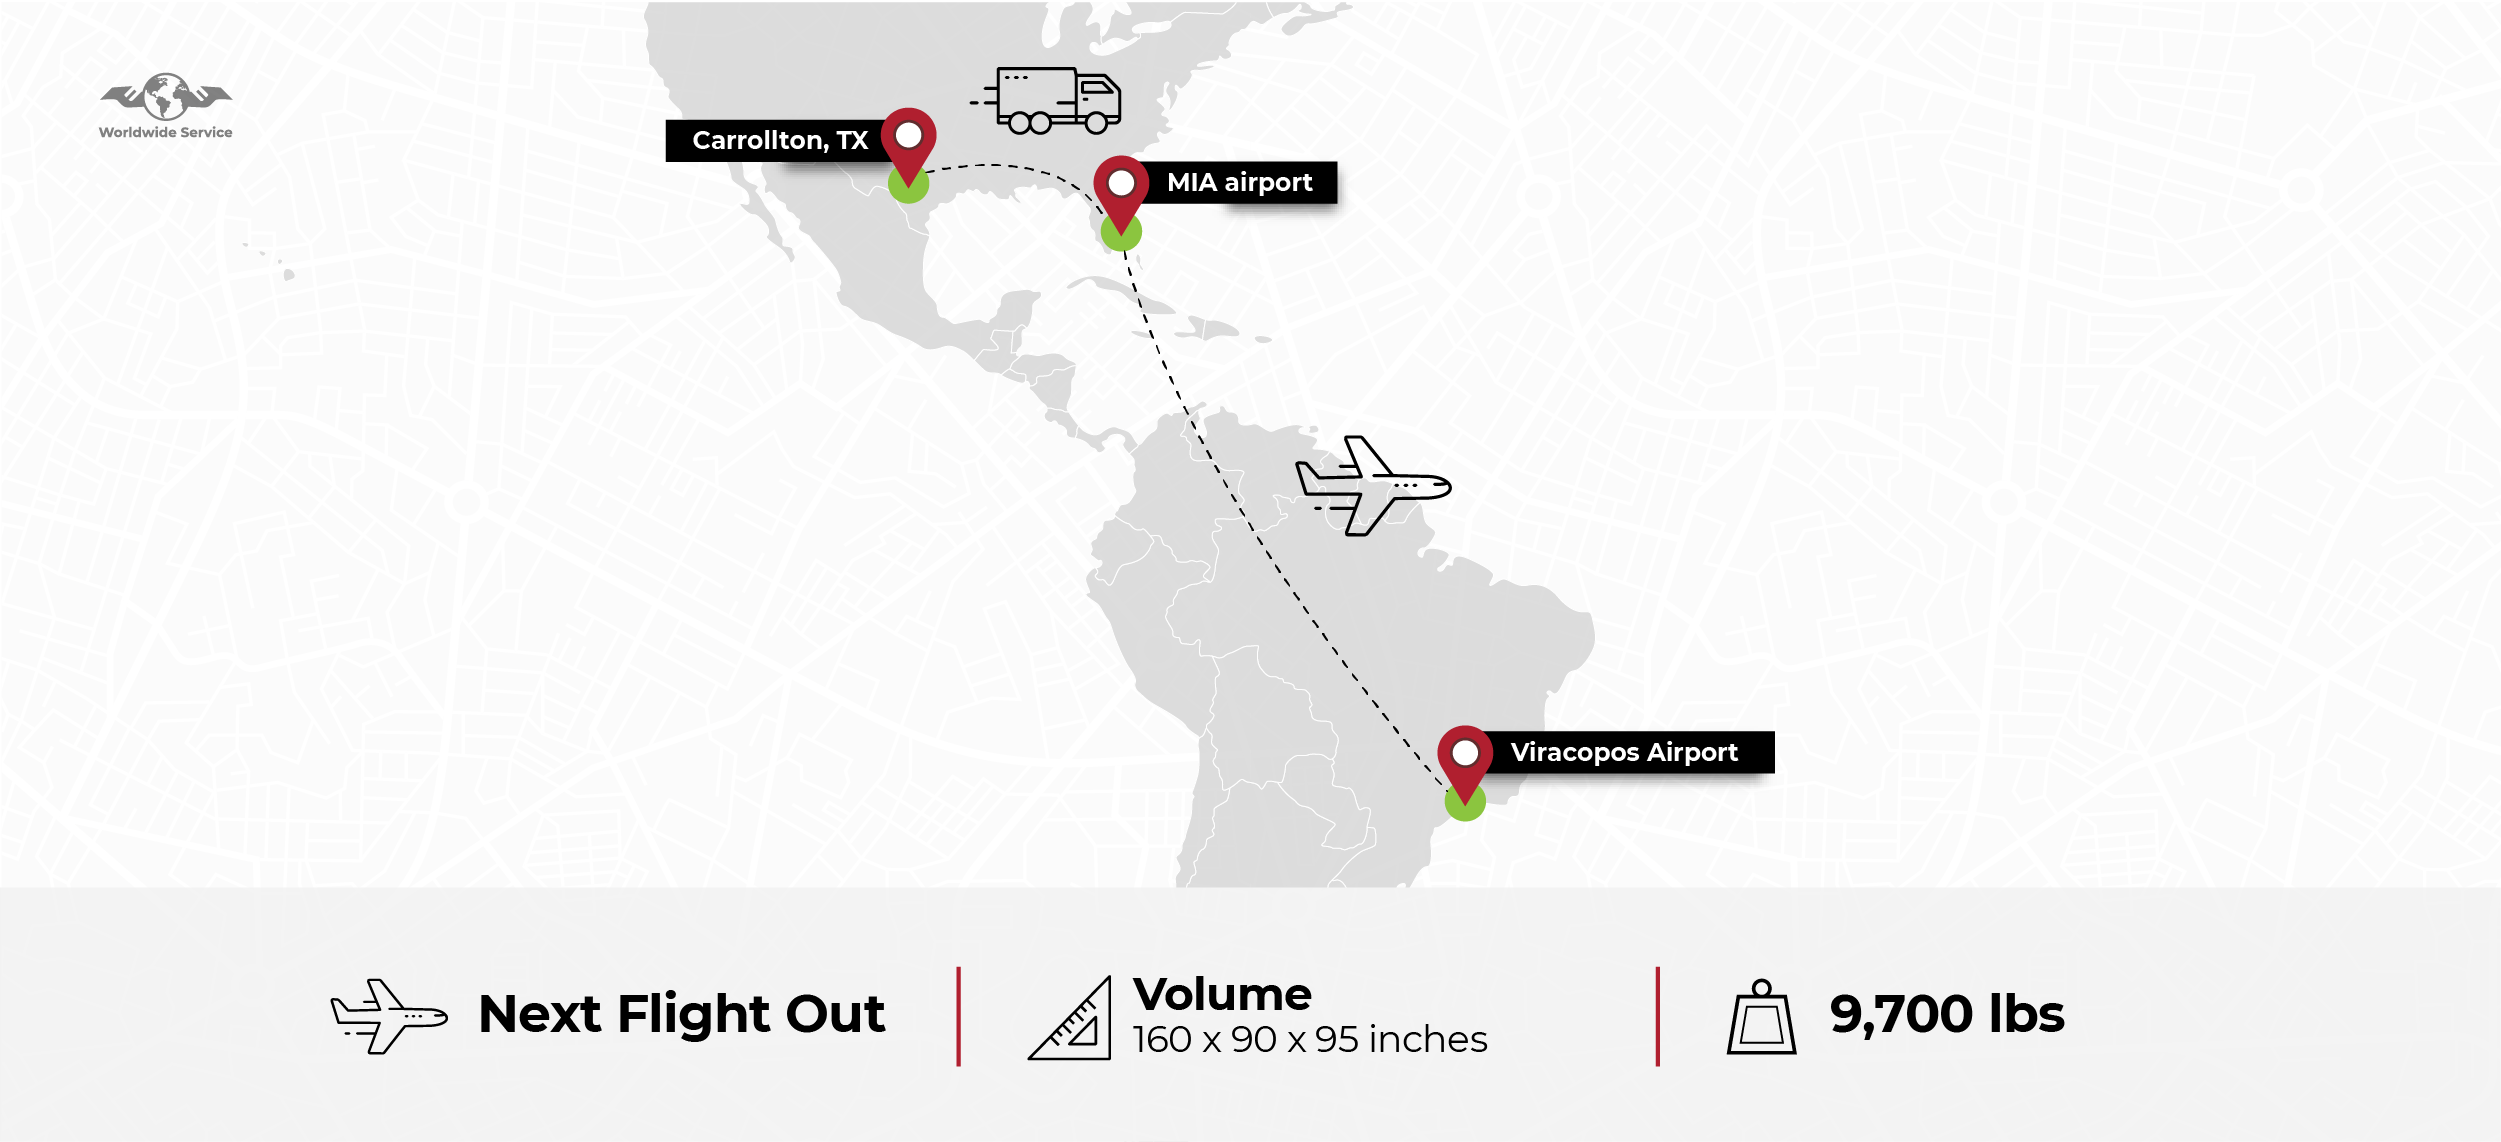 Image of a map that shows the aircraft engine route, from Carrollton to Miami Airport in a Ground Freight Unit and from Miami Airport to Viracopos Airport (in Sao Paulo, Brazil) in a direct flight. 